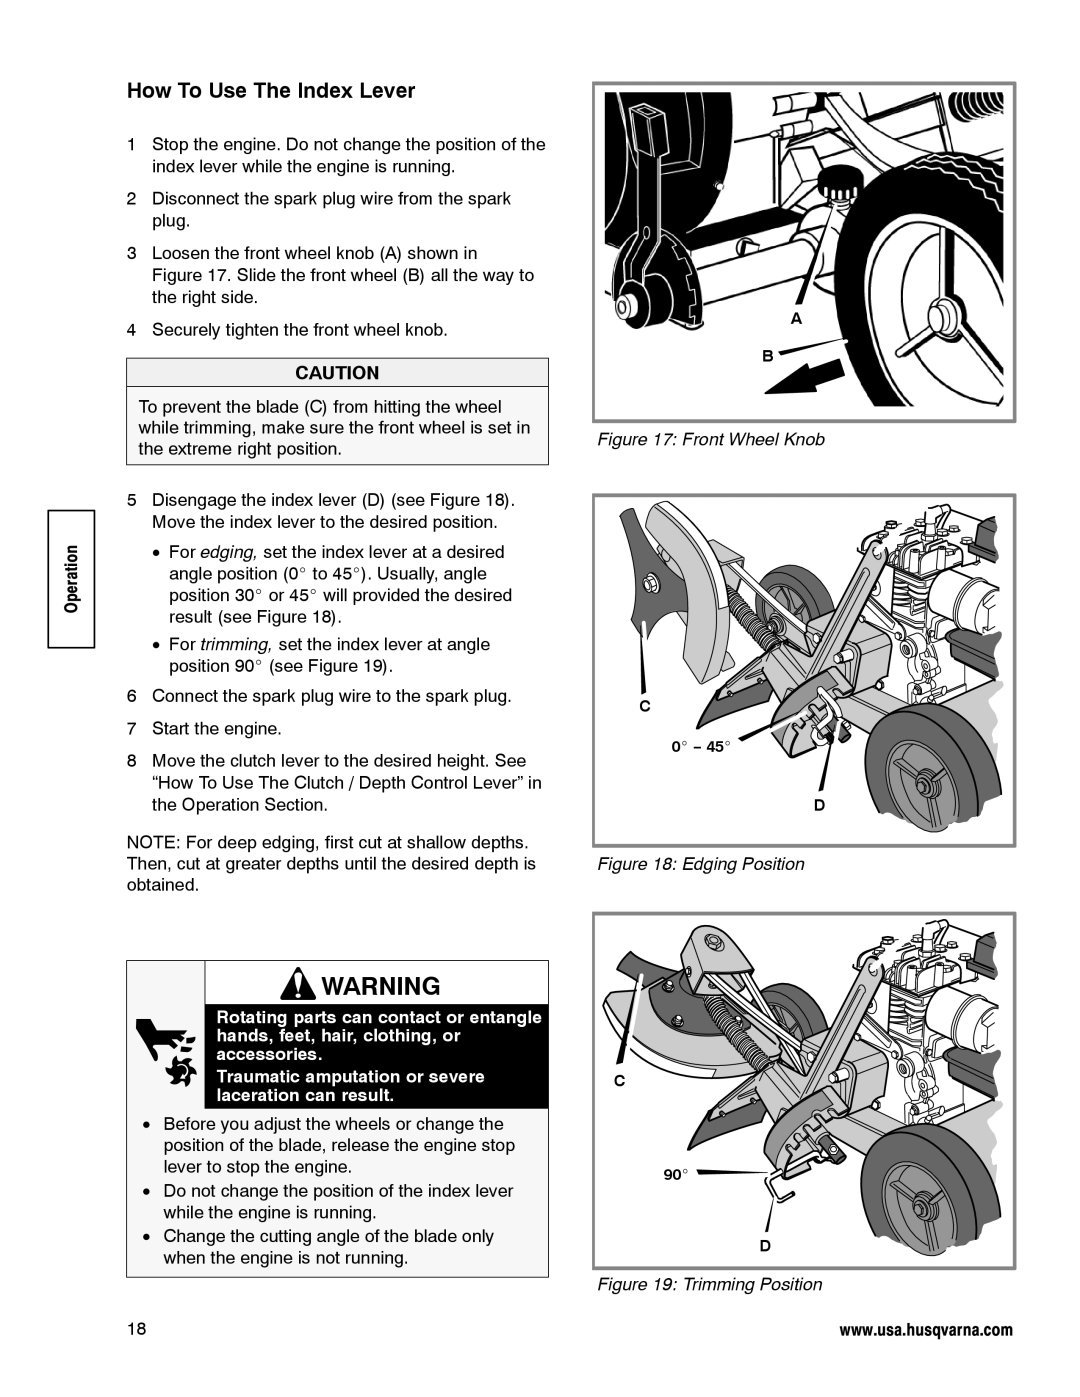 Husqvarna LE389 manual How To Use The Index Lever, Front Wheel Knob, Edging Position, Trimming Position 